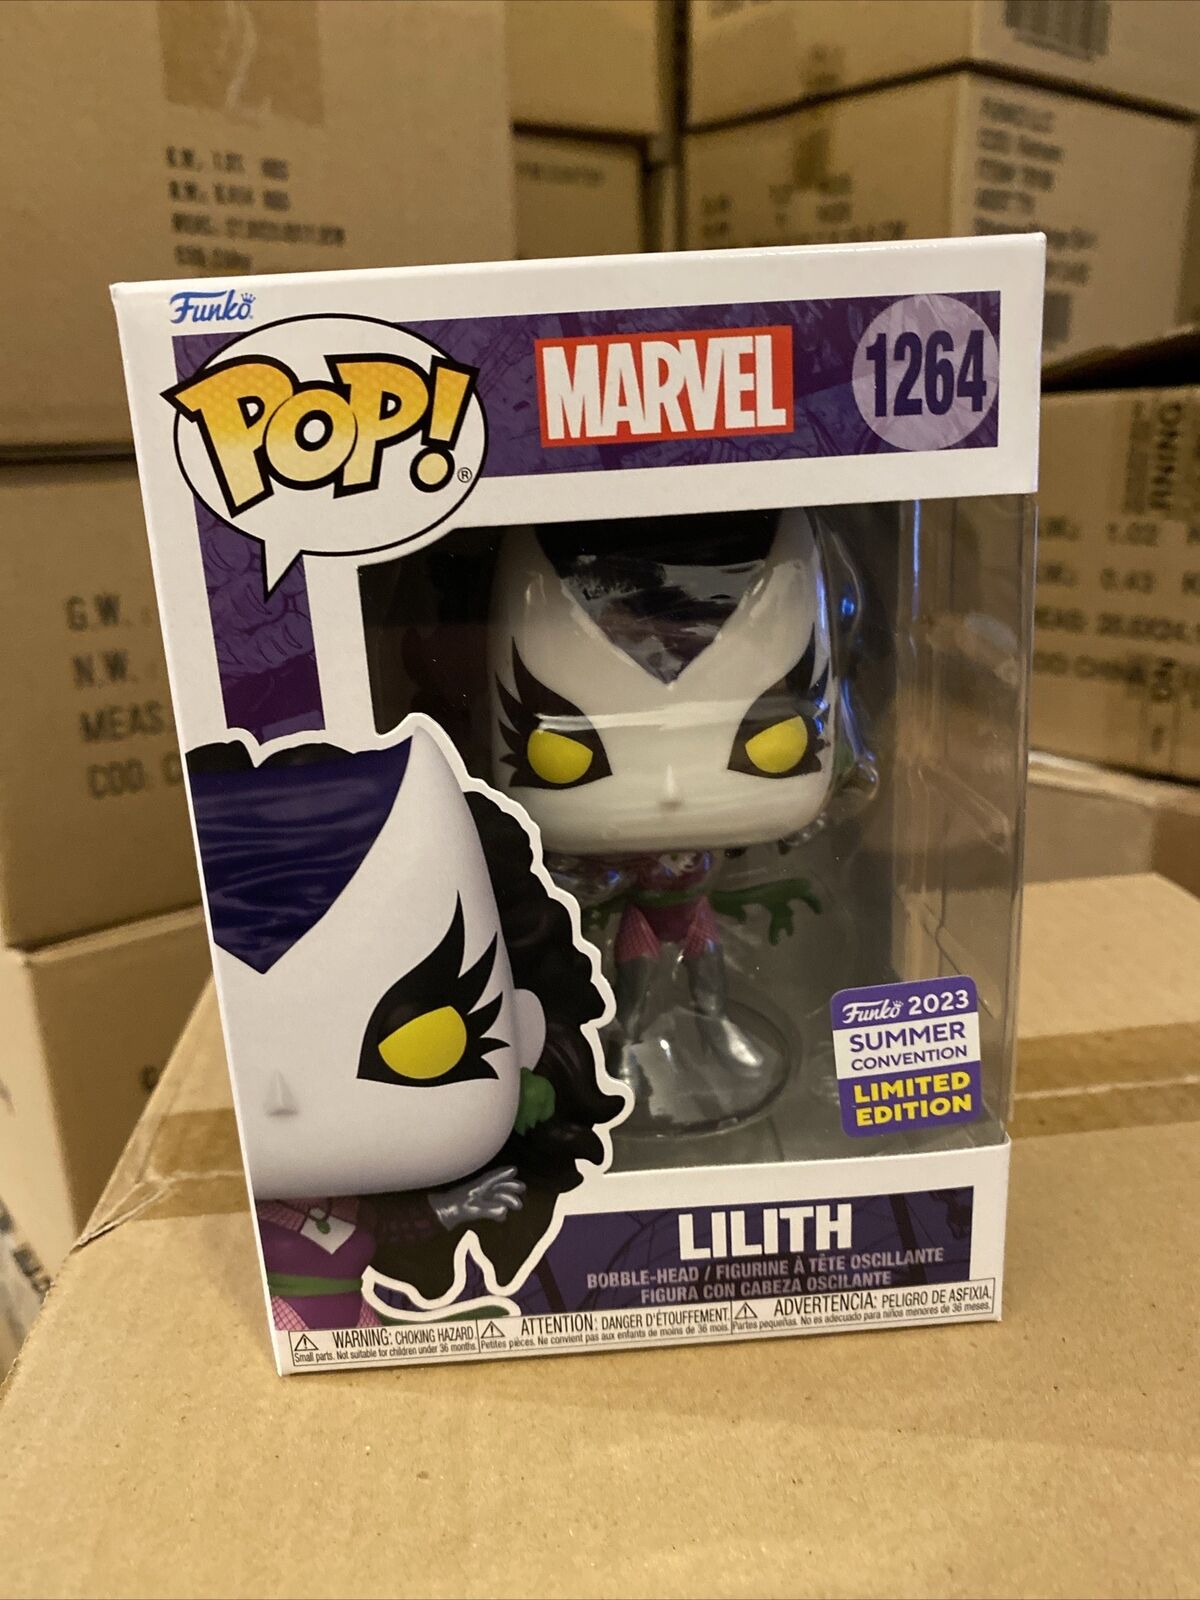 FUNKO POP MARVEL - LILITH #1264 - SDCC 2023 SUMMER CONVENTION